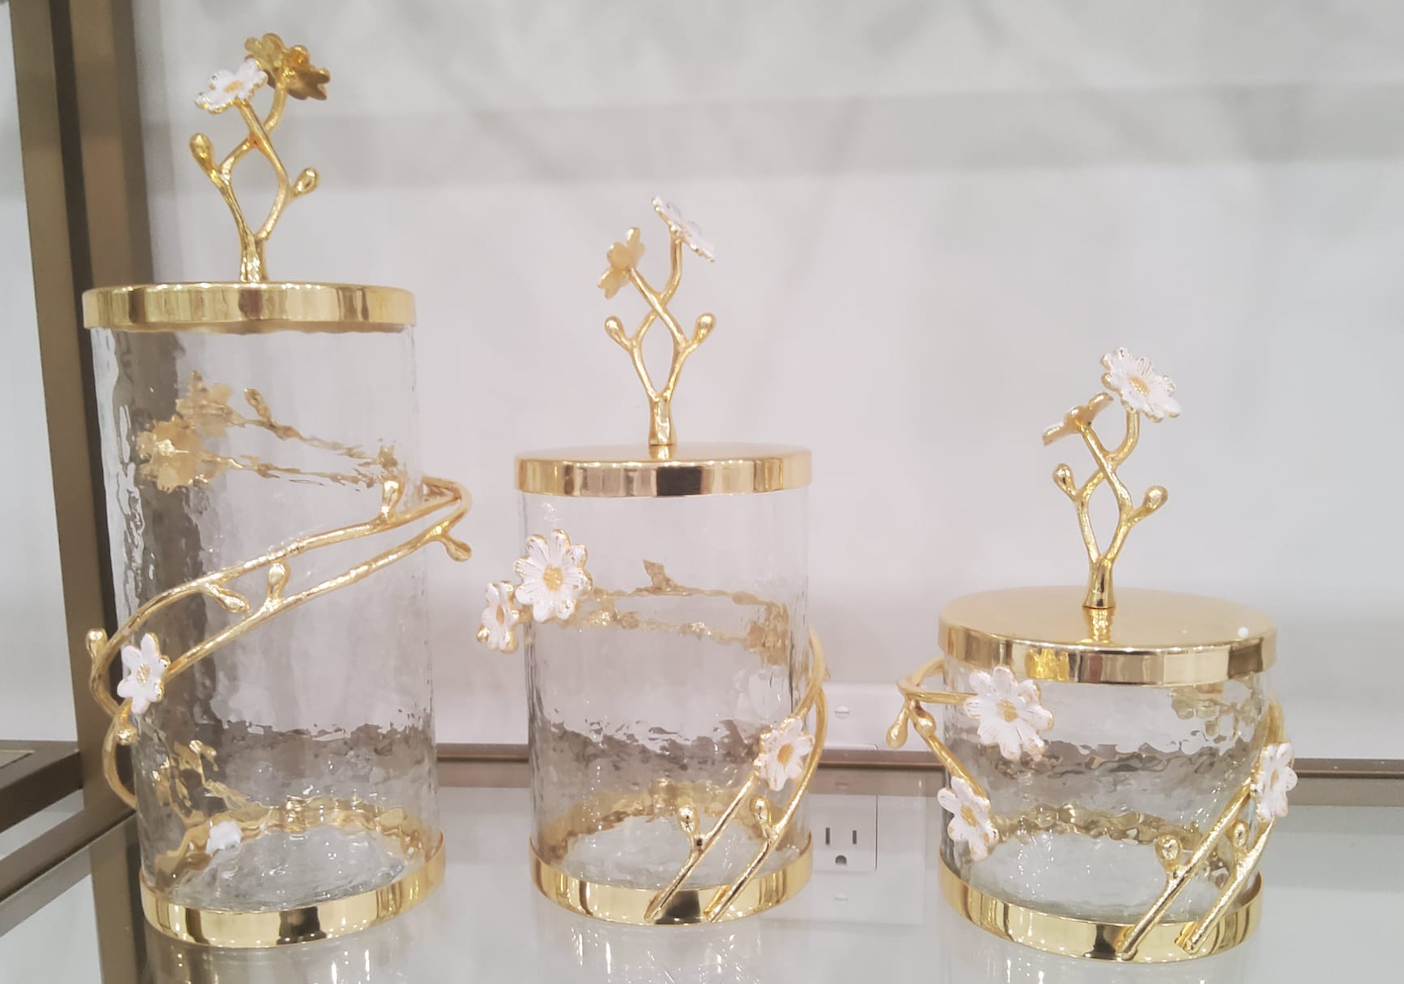 Glass Canisters with Cherry Blossom Details (3 Sizes)